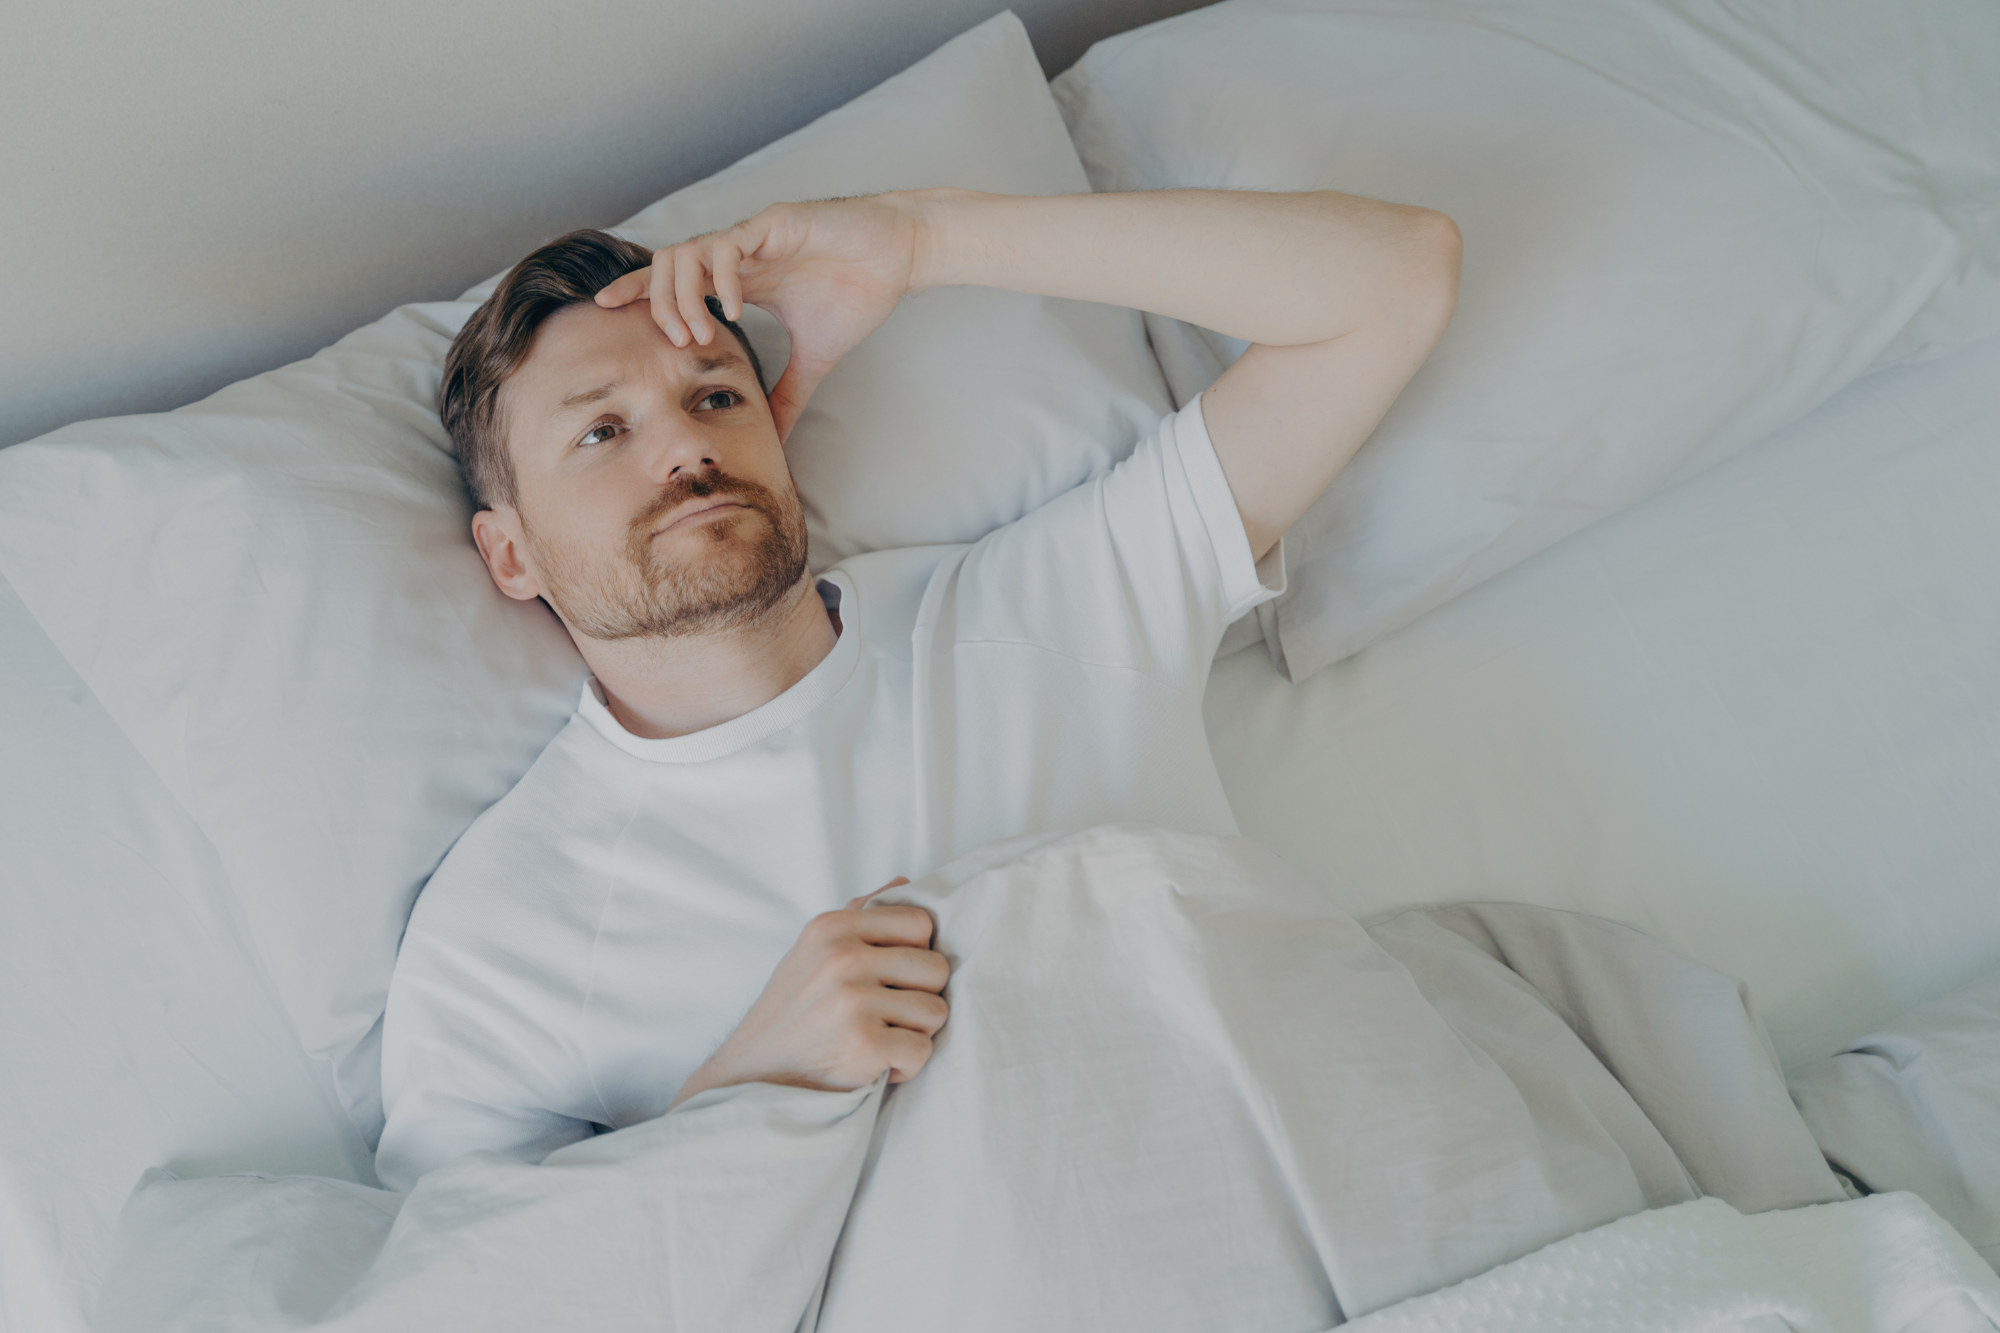 A bearded man lies in bed with insomnia, worrying about sleep’s effect on athletic performance.